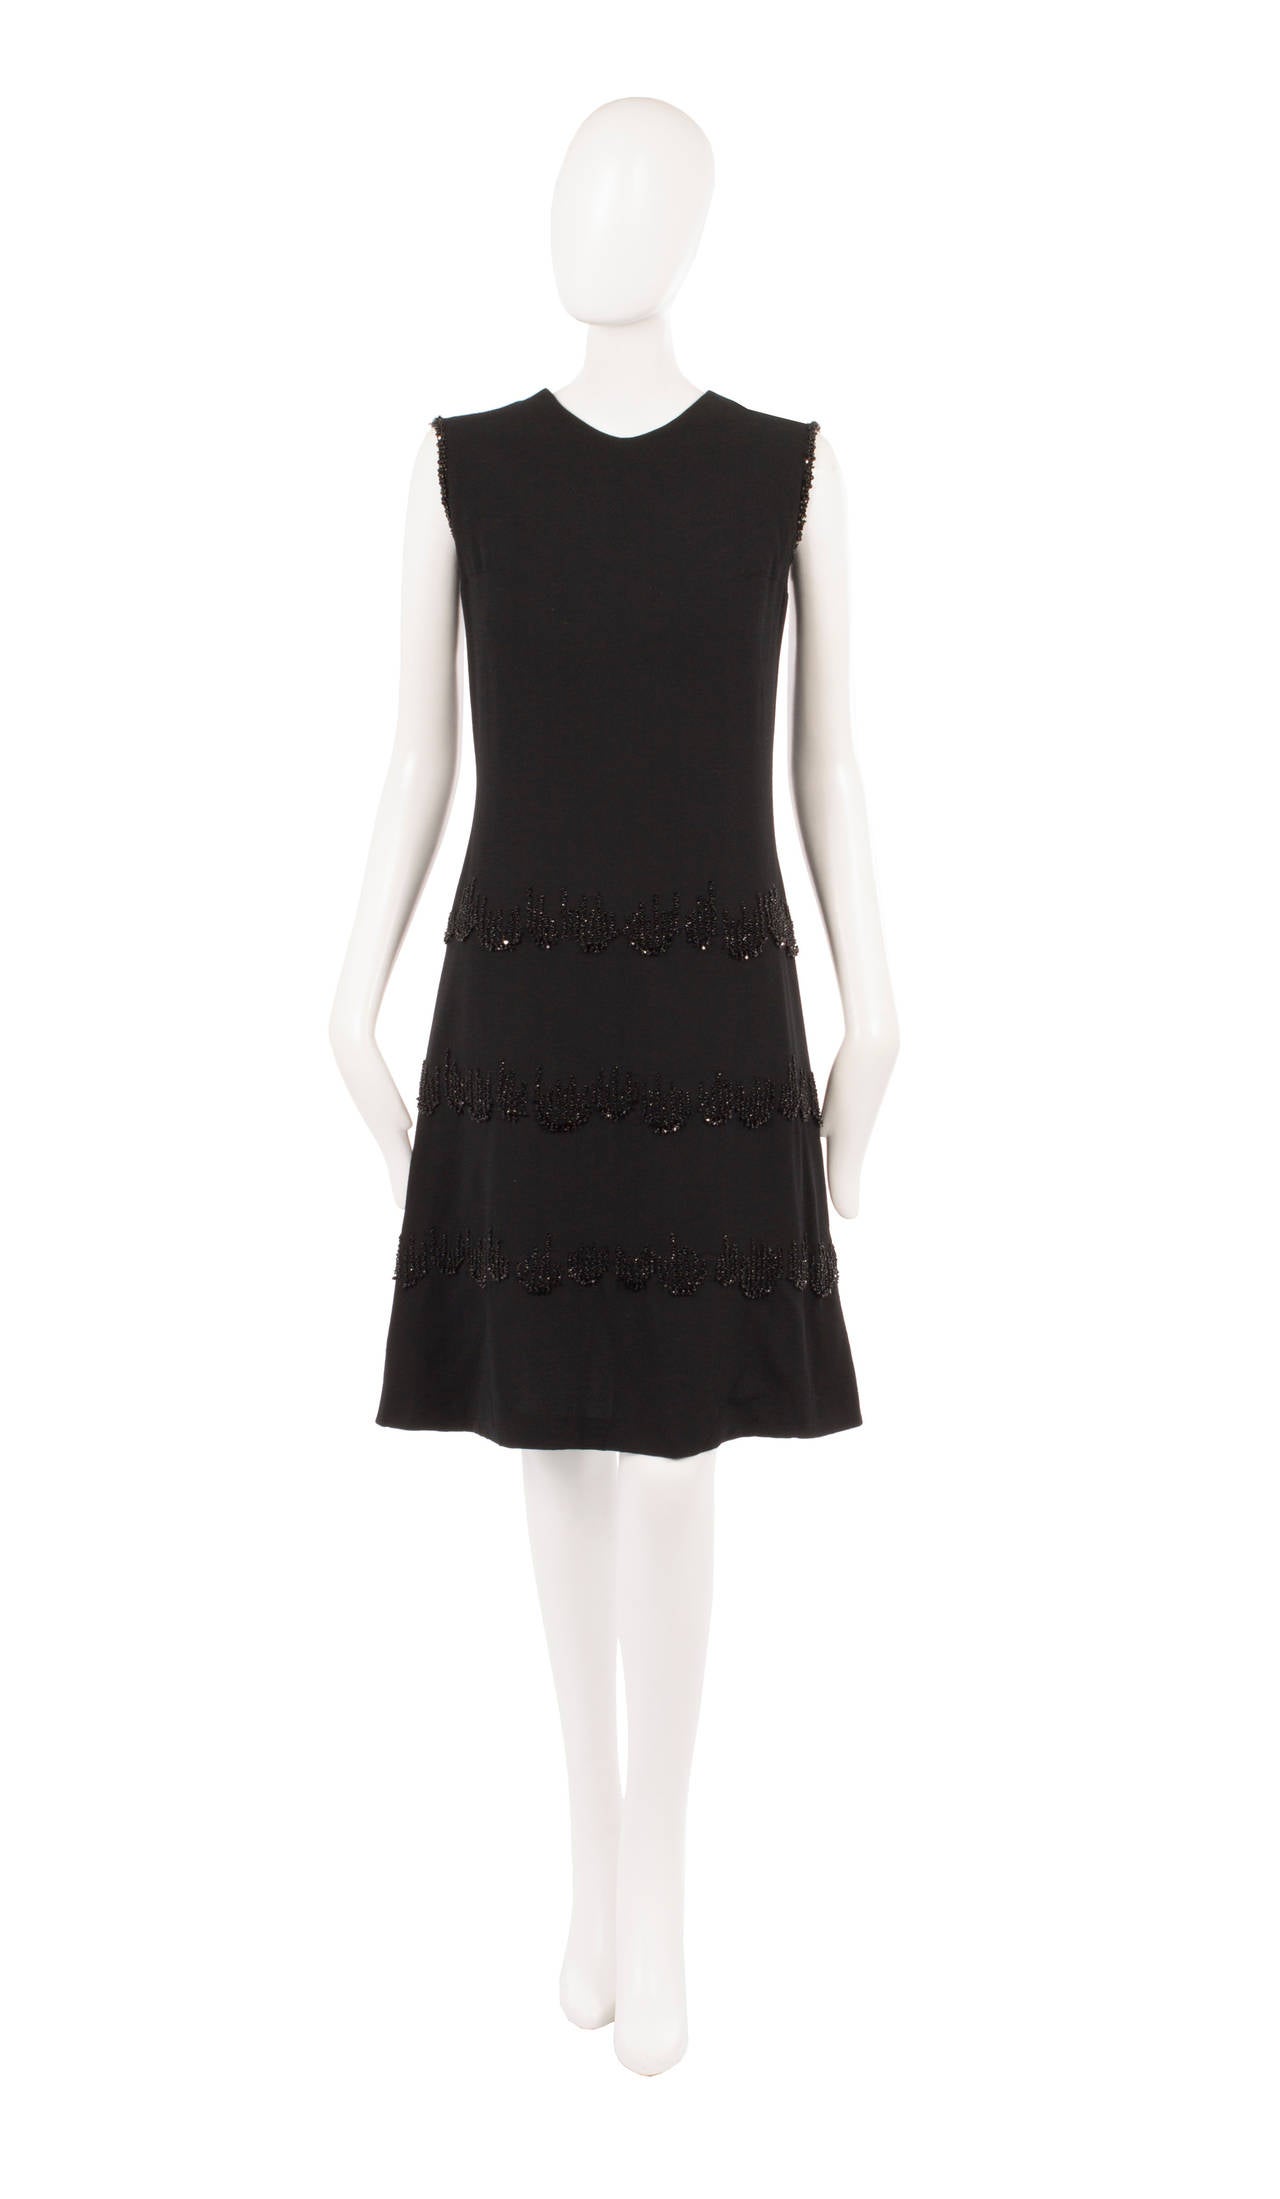 An incredibly chic cocktail option, this haute couture Carven dress is constructed from black silk crepe and has a flattering 60s shift shape. Featuring bands of jet beading around the skirt and shoulders, the dress has a subtle sparkle and is